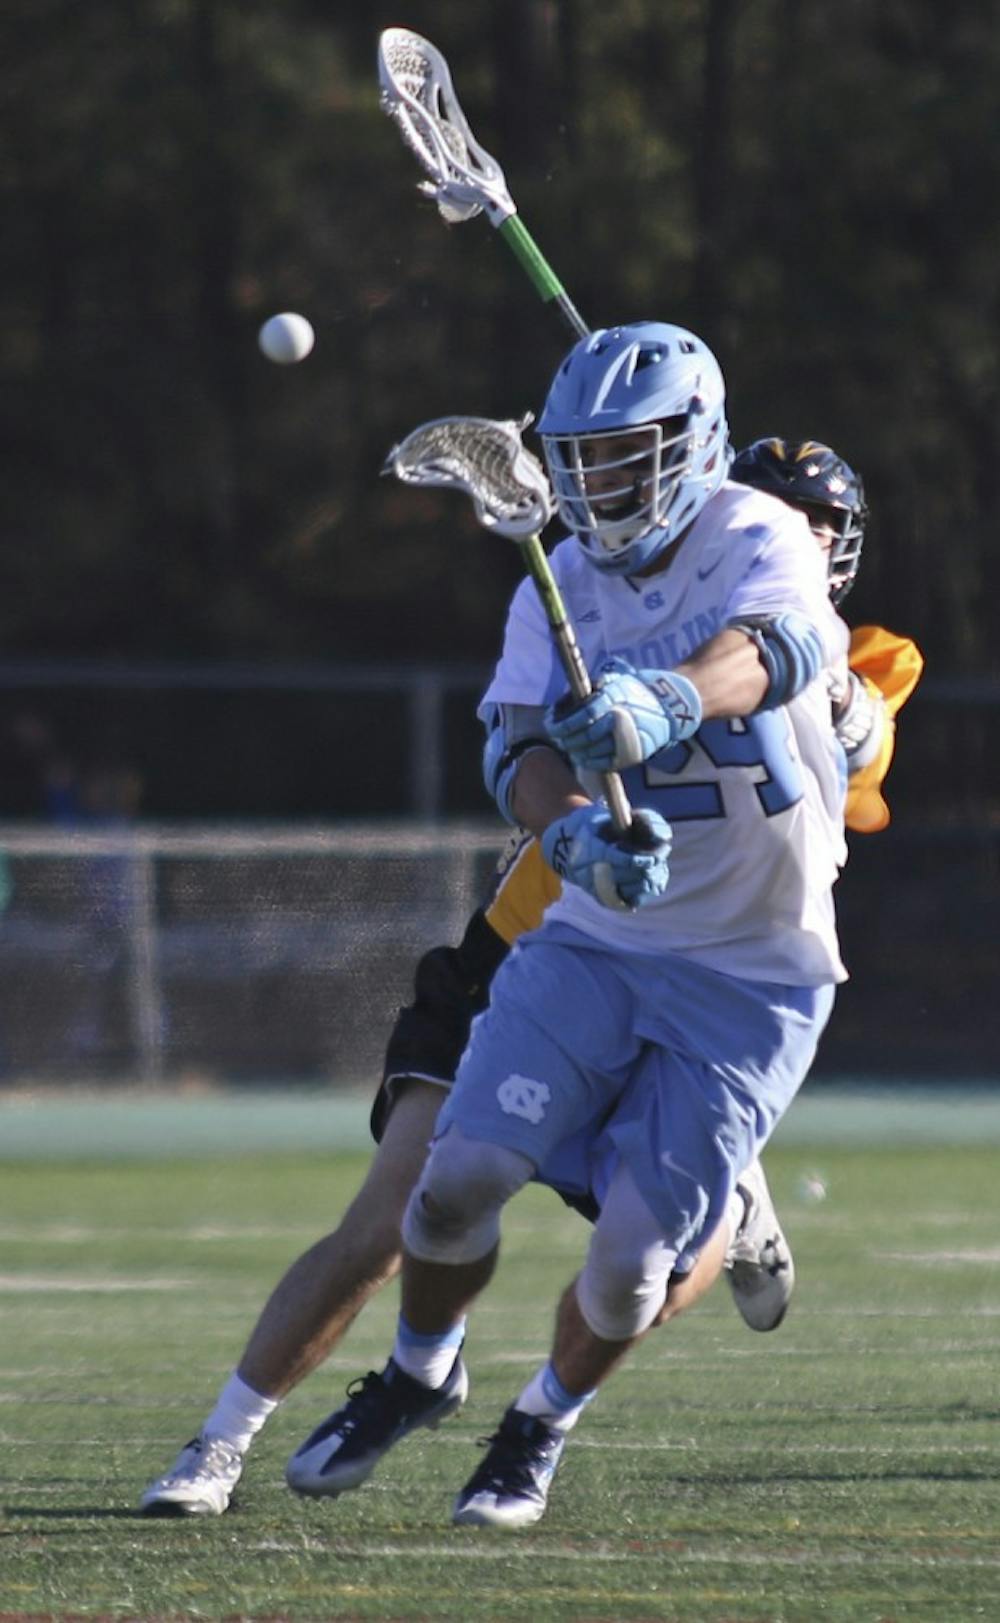 UNC midfielder Stephen Kelly (24) fires a shot after winning a face-off against UMBC on Saturday at Cardinal Gibbons High School in Raleigh.